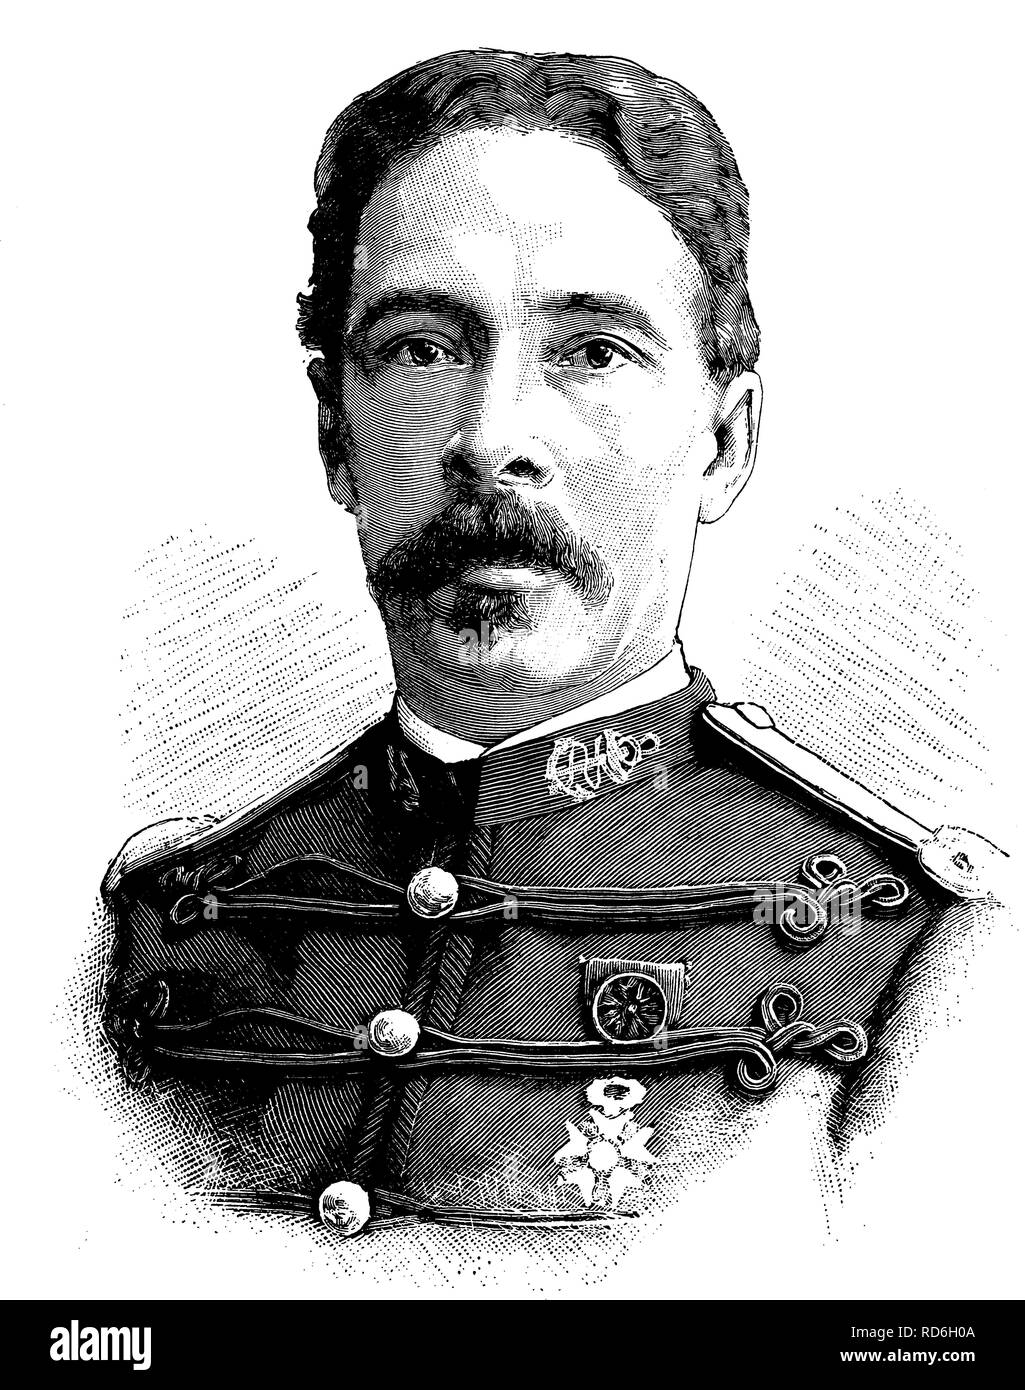 Alfred-Amédée Dodds, 1842 - 1922, ufficiale francese del expeditionary corps nella Seconda Guerra Franco-Dahomean in Africa occidentale, Foto Stock